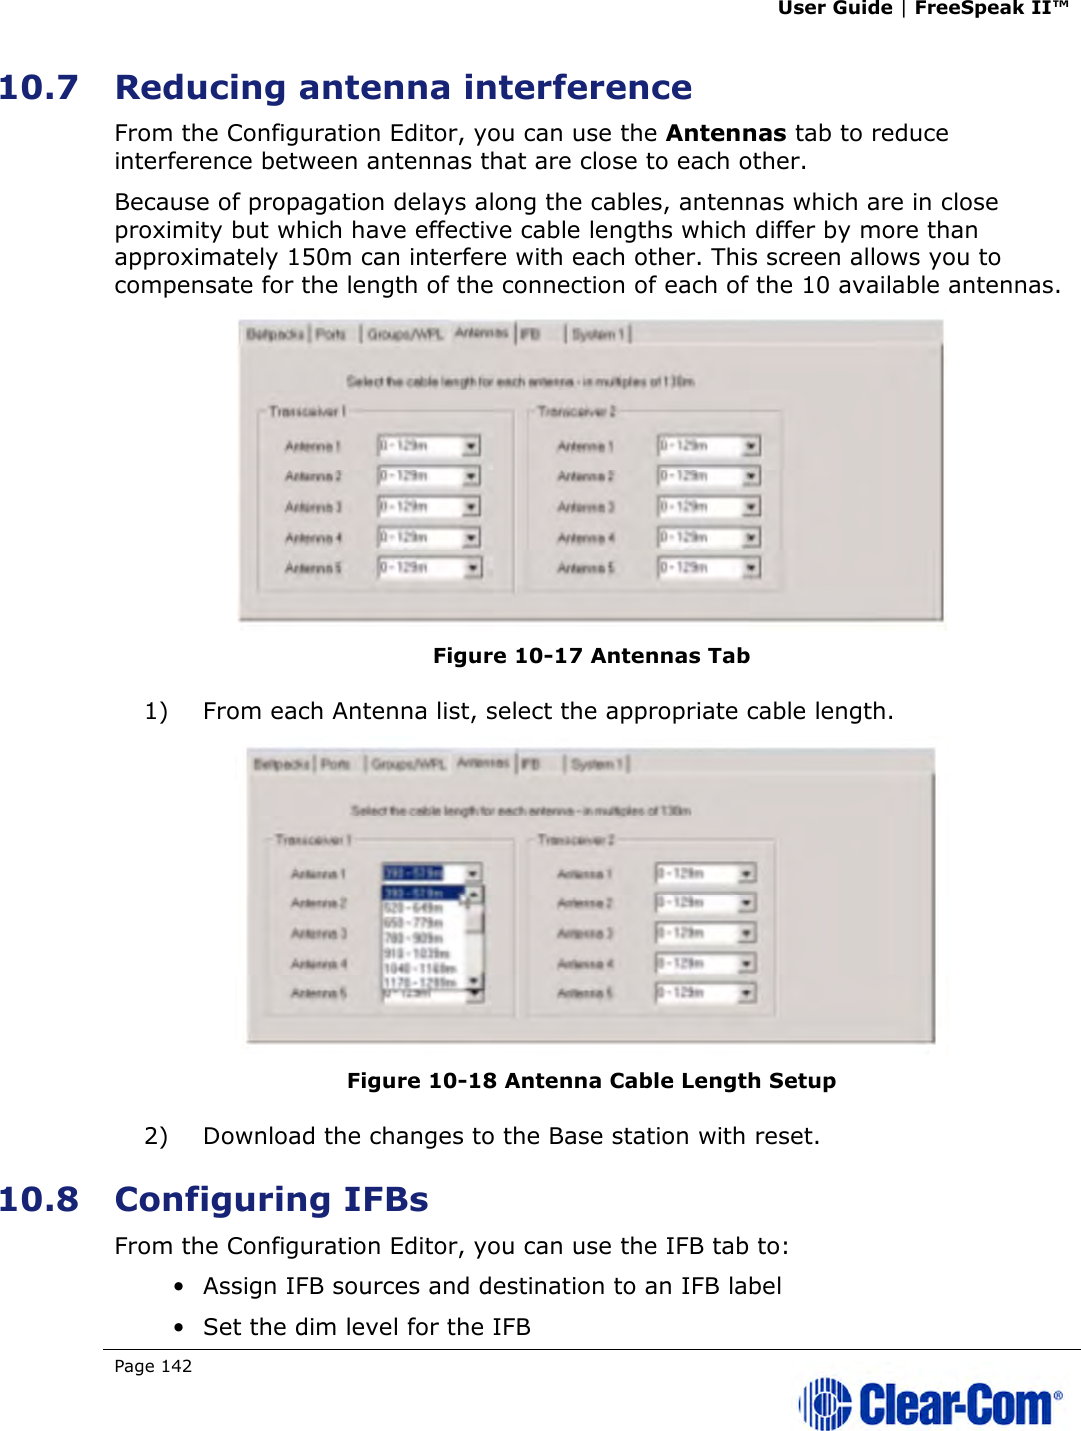 User Guide | FreeSpeak II™  Page 142   10.7 Reducing antenna interference  From the Configuration Editor, you can use the Antennas tab to reduce interference between antennas that are close to each other. Because of propagation delays along the cables, antennas which are in close proximity but which have effective cable lengths which differ by more than approximately 150m can interfere with each other. This screen allows you to compensate for the length of the connection of each of the 10 available antennas.  Figure 10-17 Antennas Tab 1) From each Antenna list, select the appropriate cable length.  Figure 10-18 Antenna Cable Length Setup 2) Download the changes to the Base station with reset. 10.8 Configuring IFBs From the Configuration Editor, you can use the IFB tab to: • Assign IFB sources and destination to an IFB label • Set the dim level for the IFB 